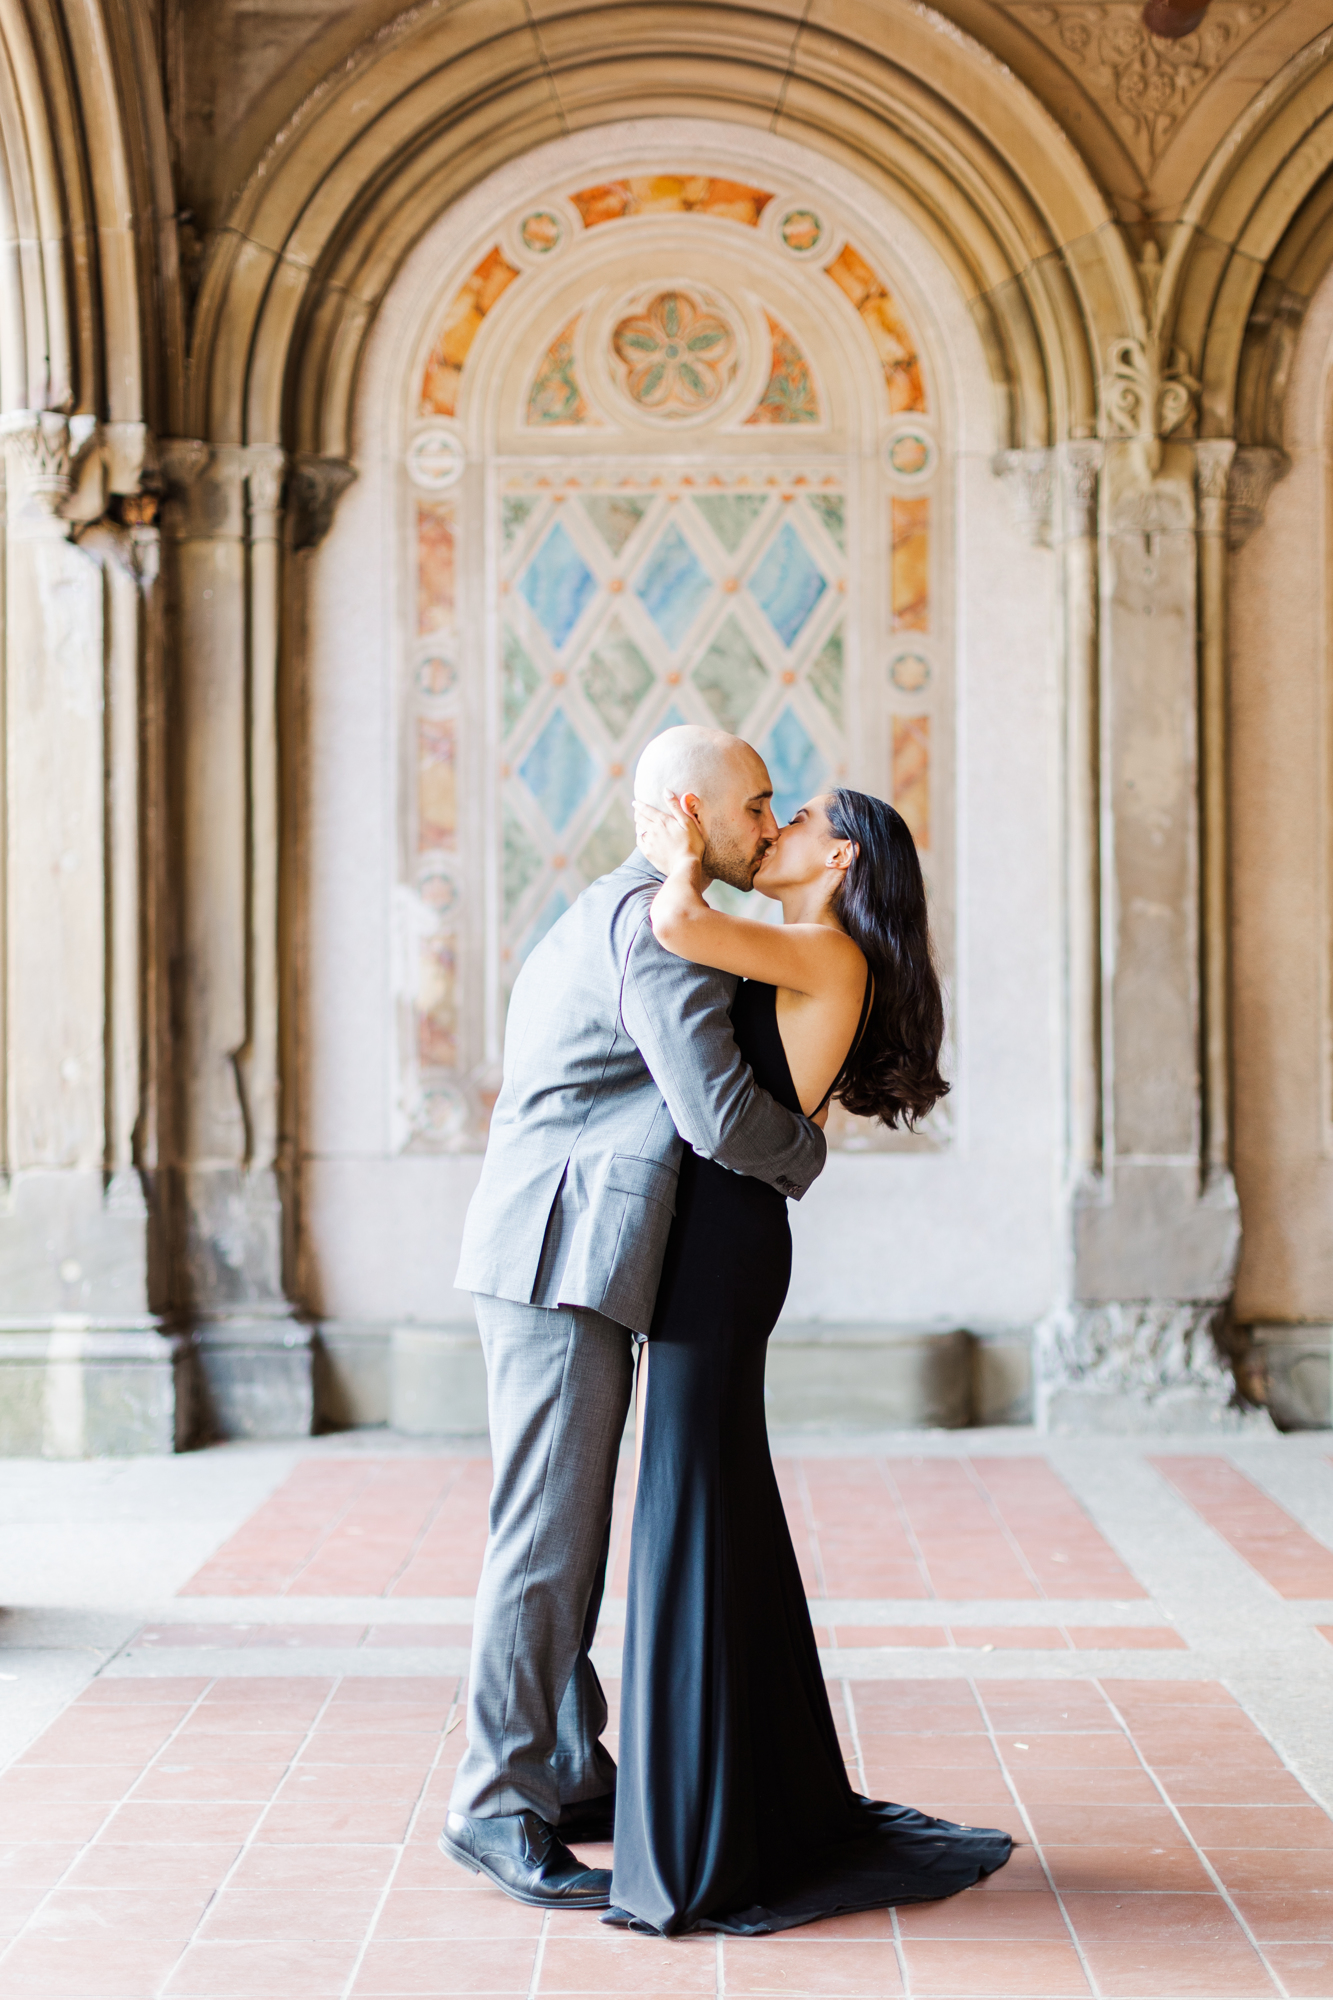 Special Bethesda Terrace Engagement Photo Shoot